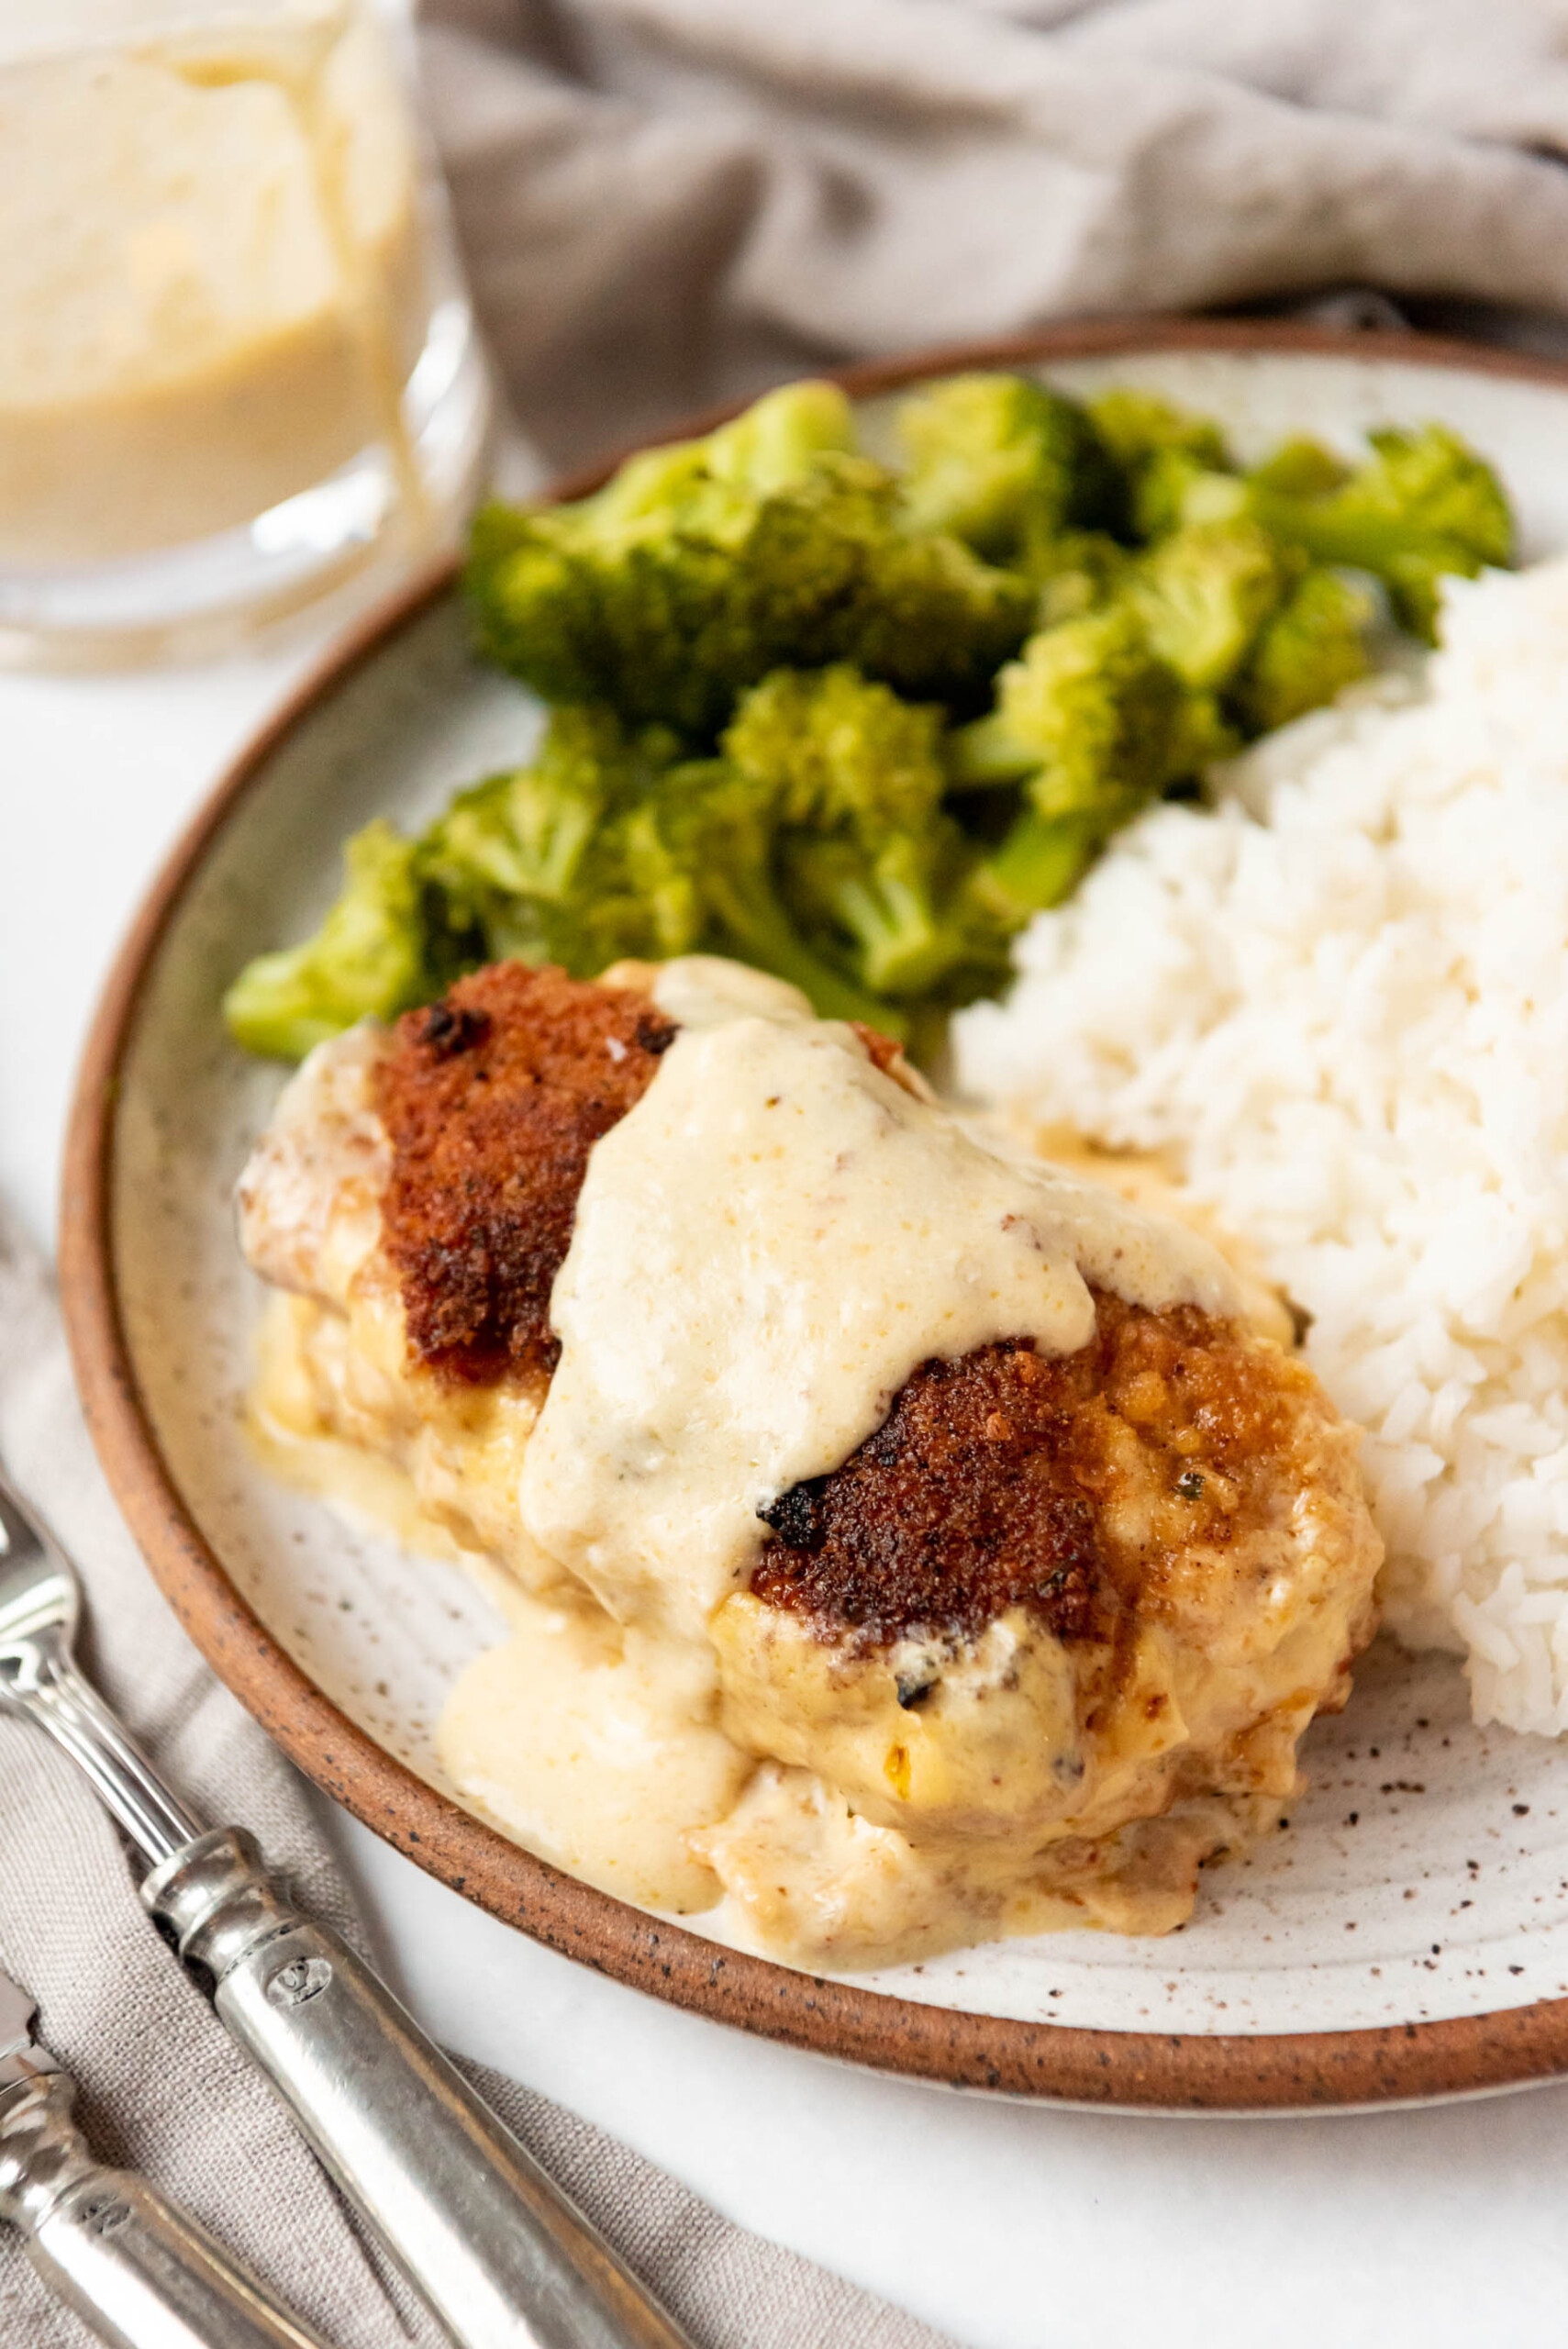 A serving of chicken cordon bleu on a plate with broccoli and rice.